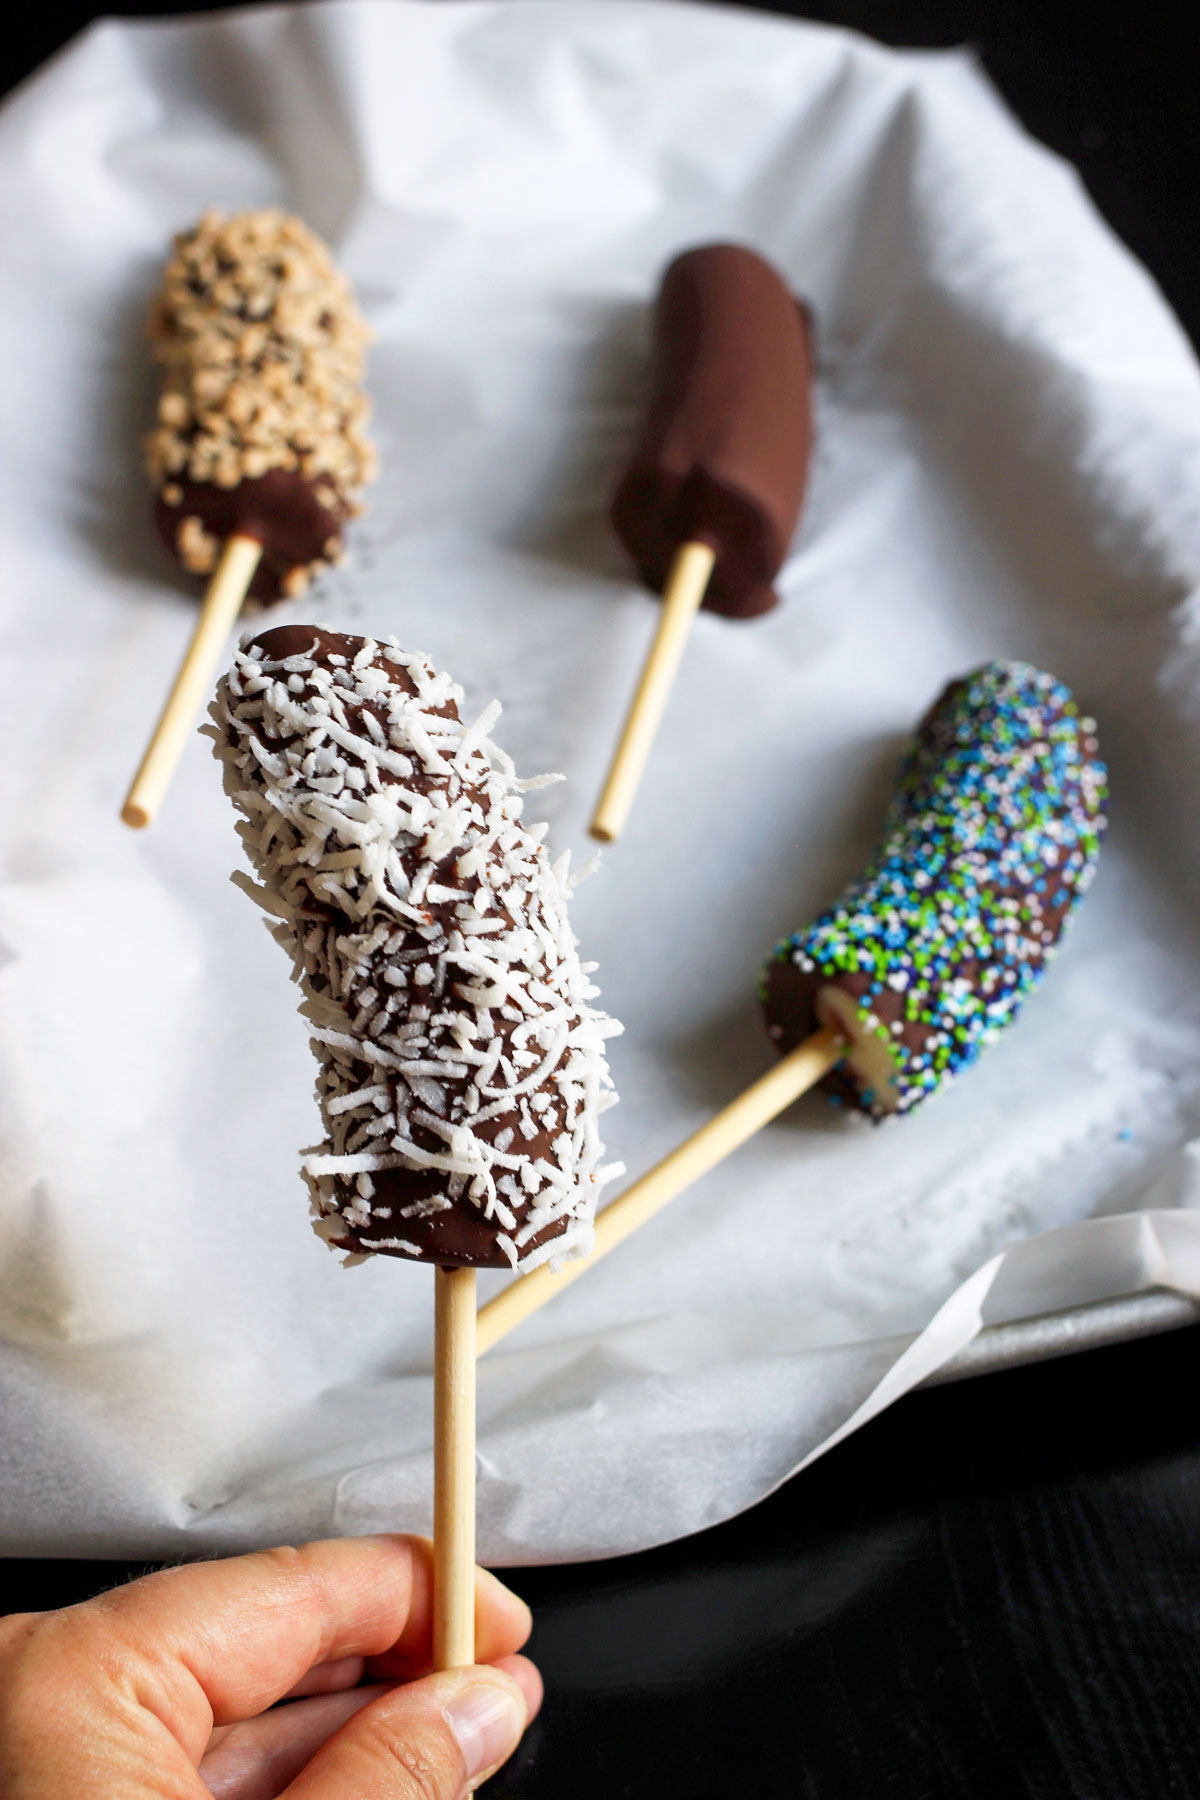 hand holding chocolate dipped banana coated with coconut in front of three frozen bananas with other toppings on a tray.